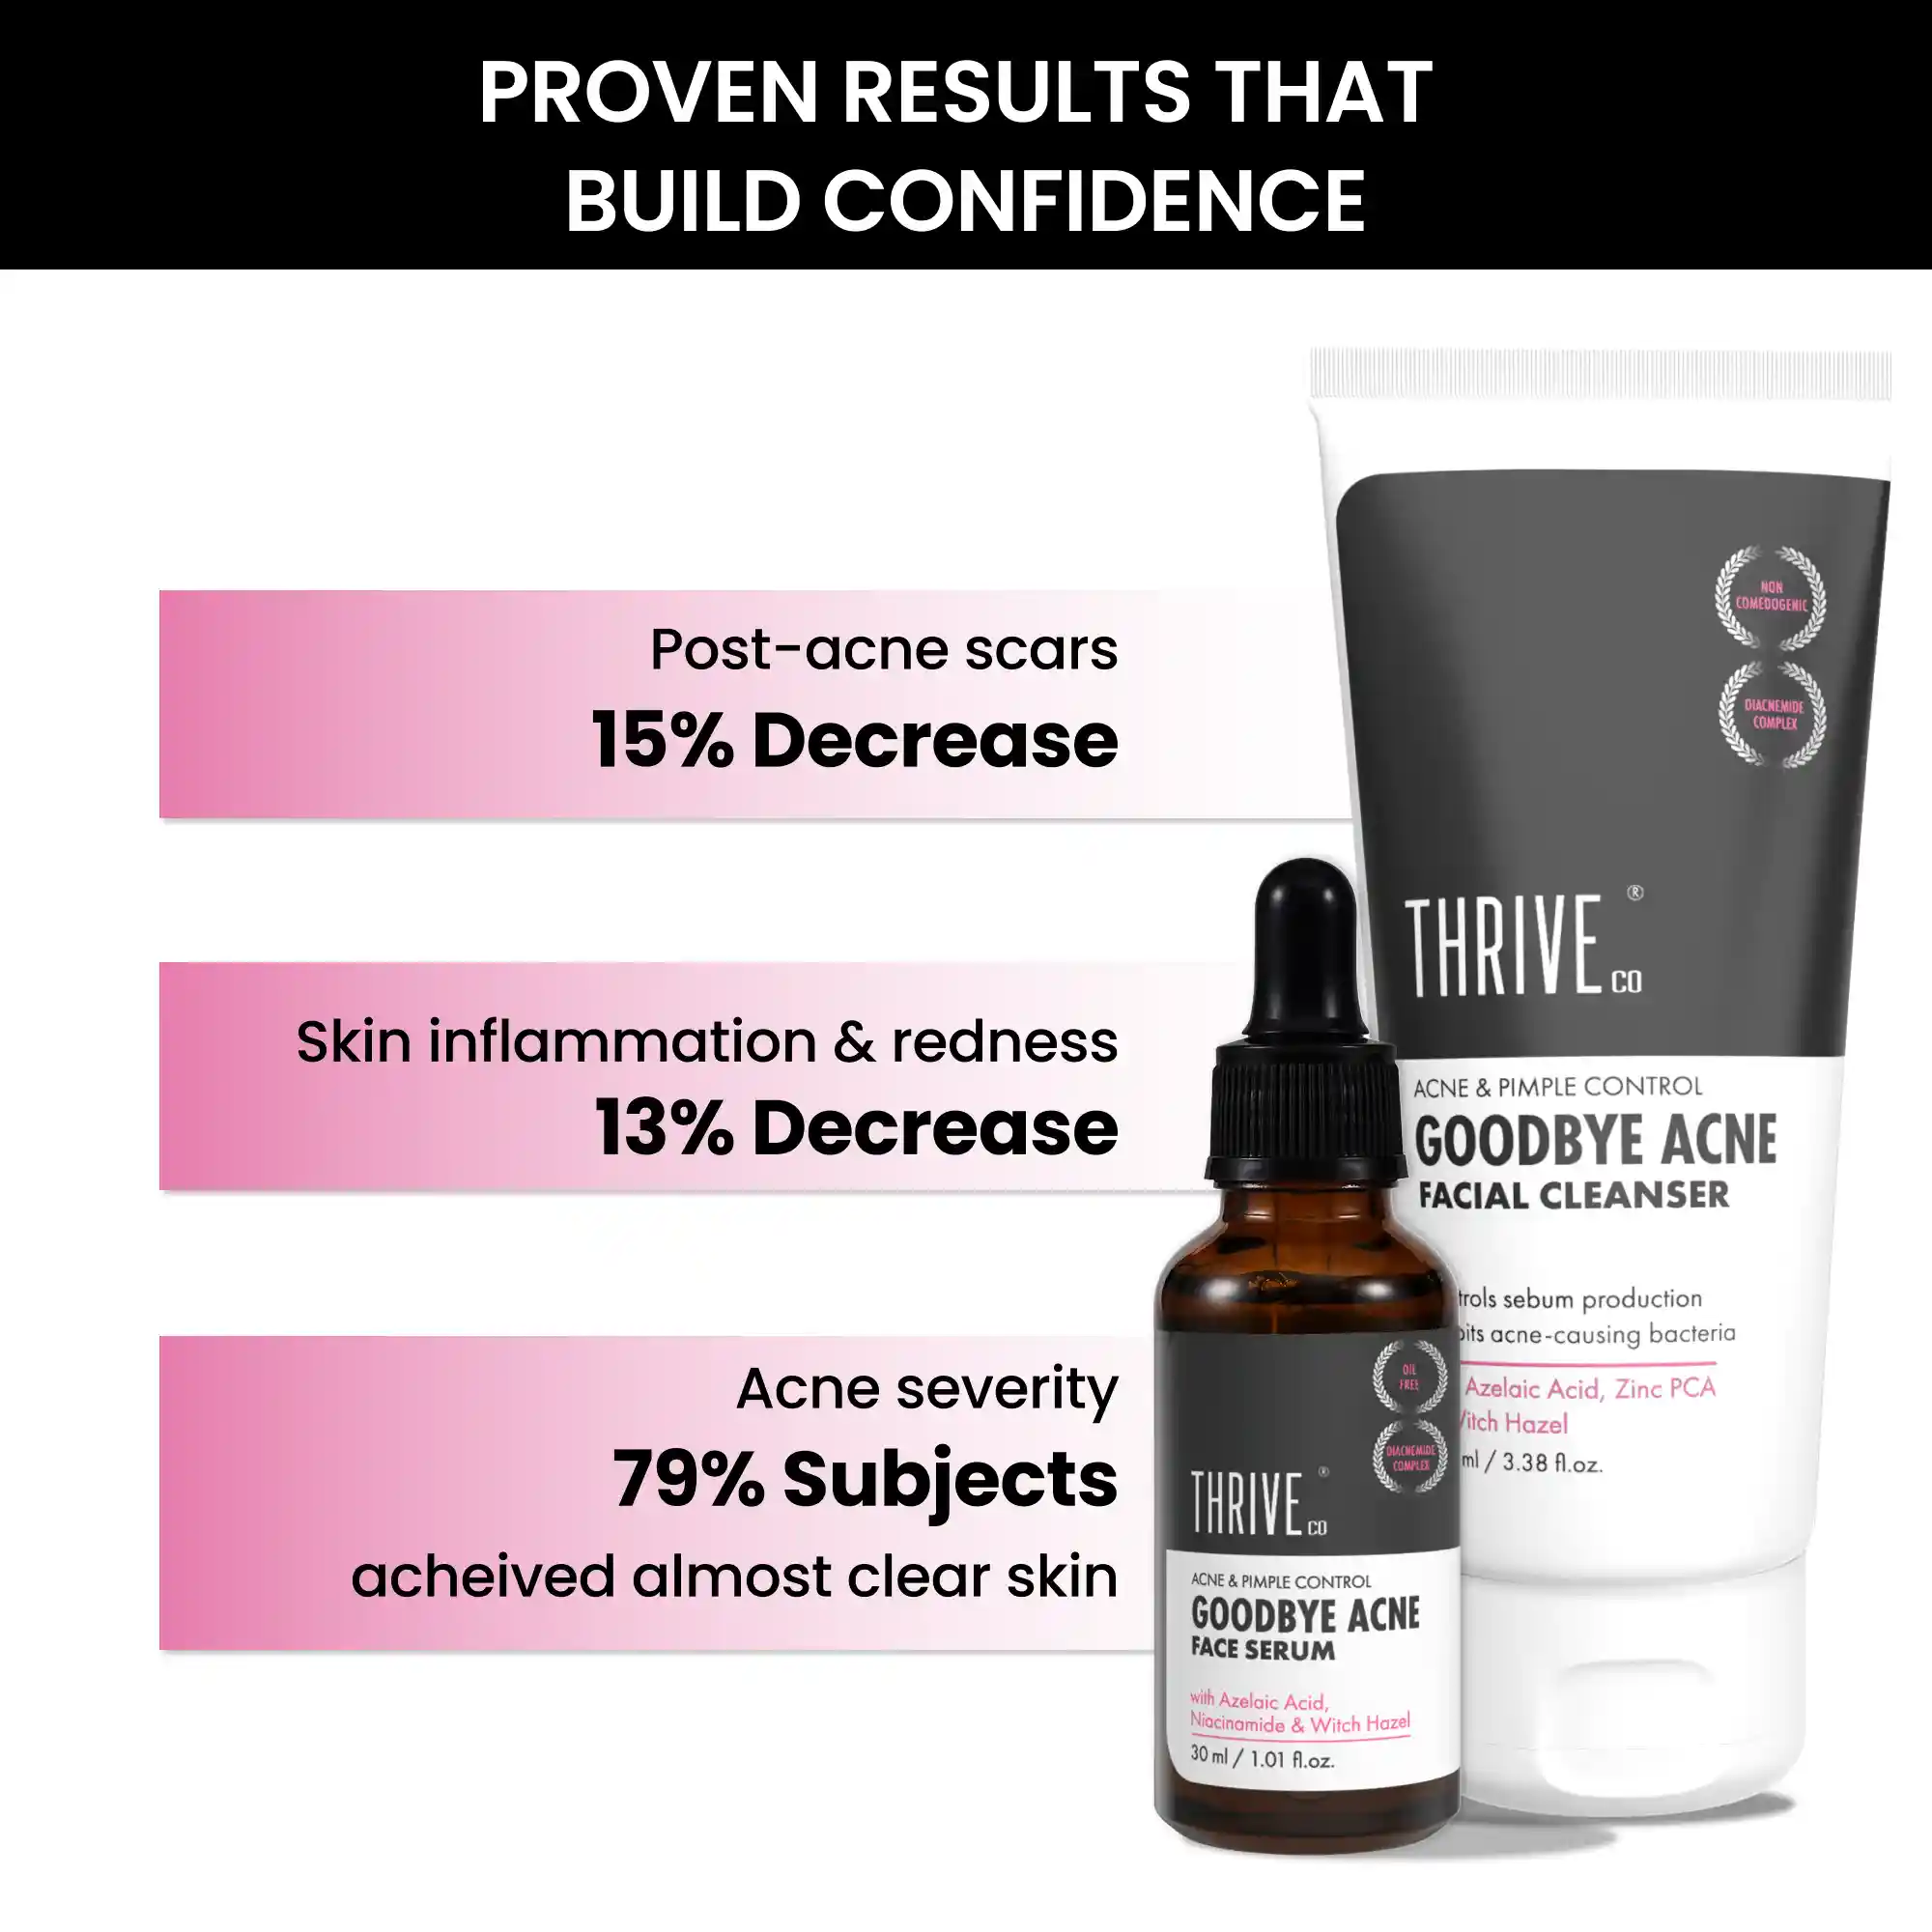 Not just claims, ThriveCo Goodbye Acne Kit for women also gives proven results